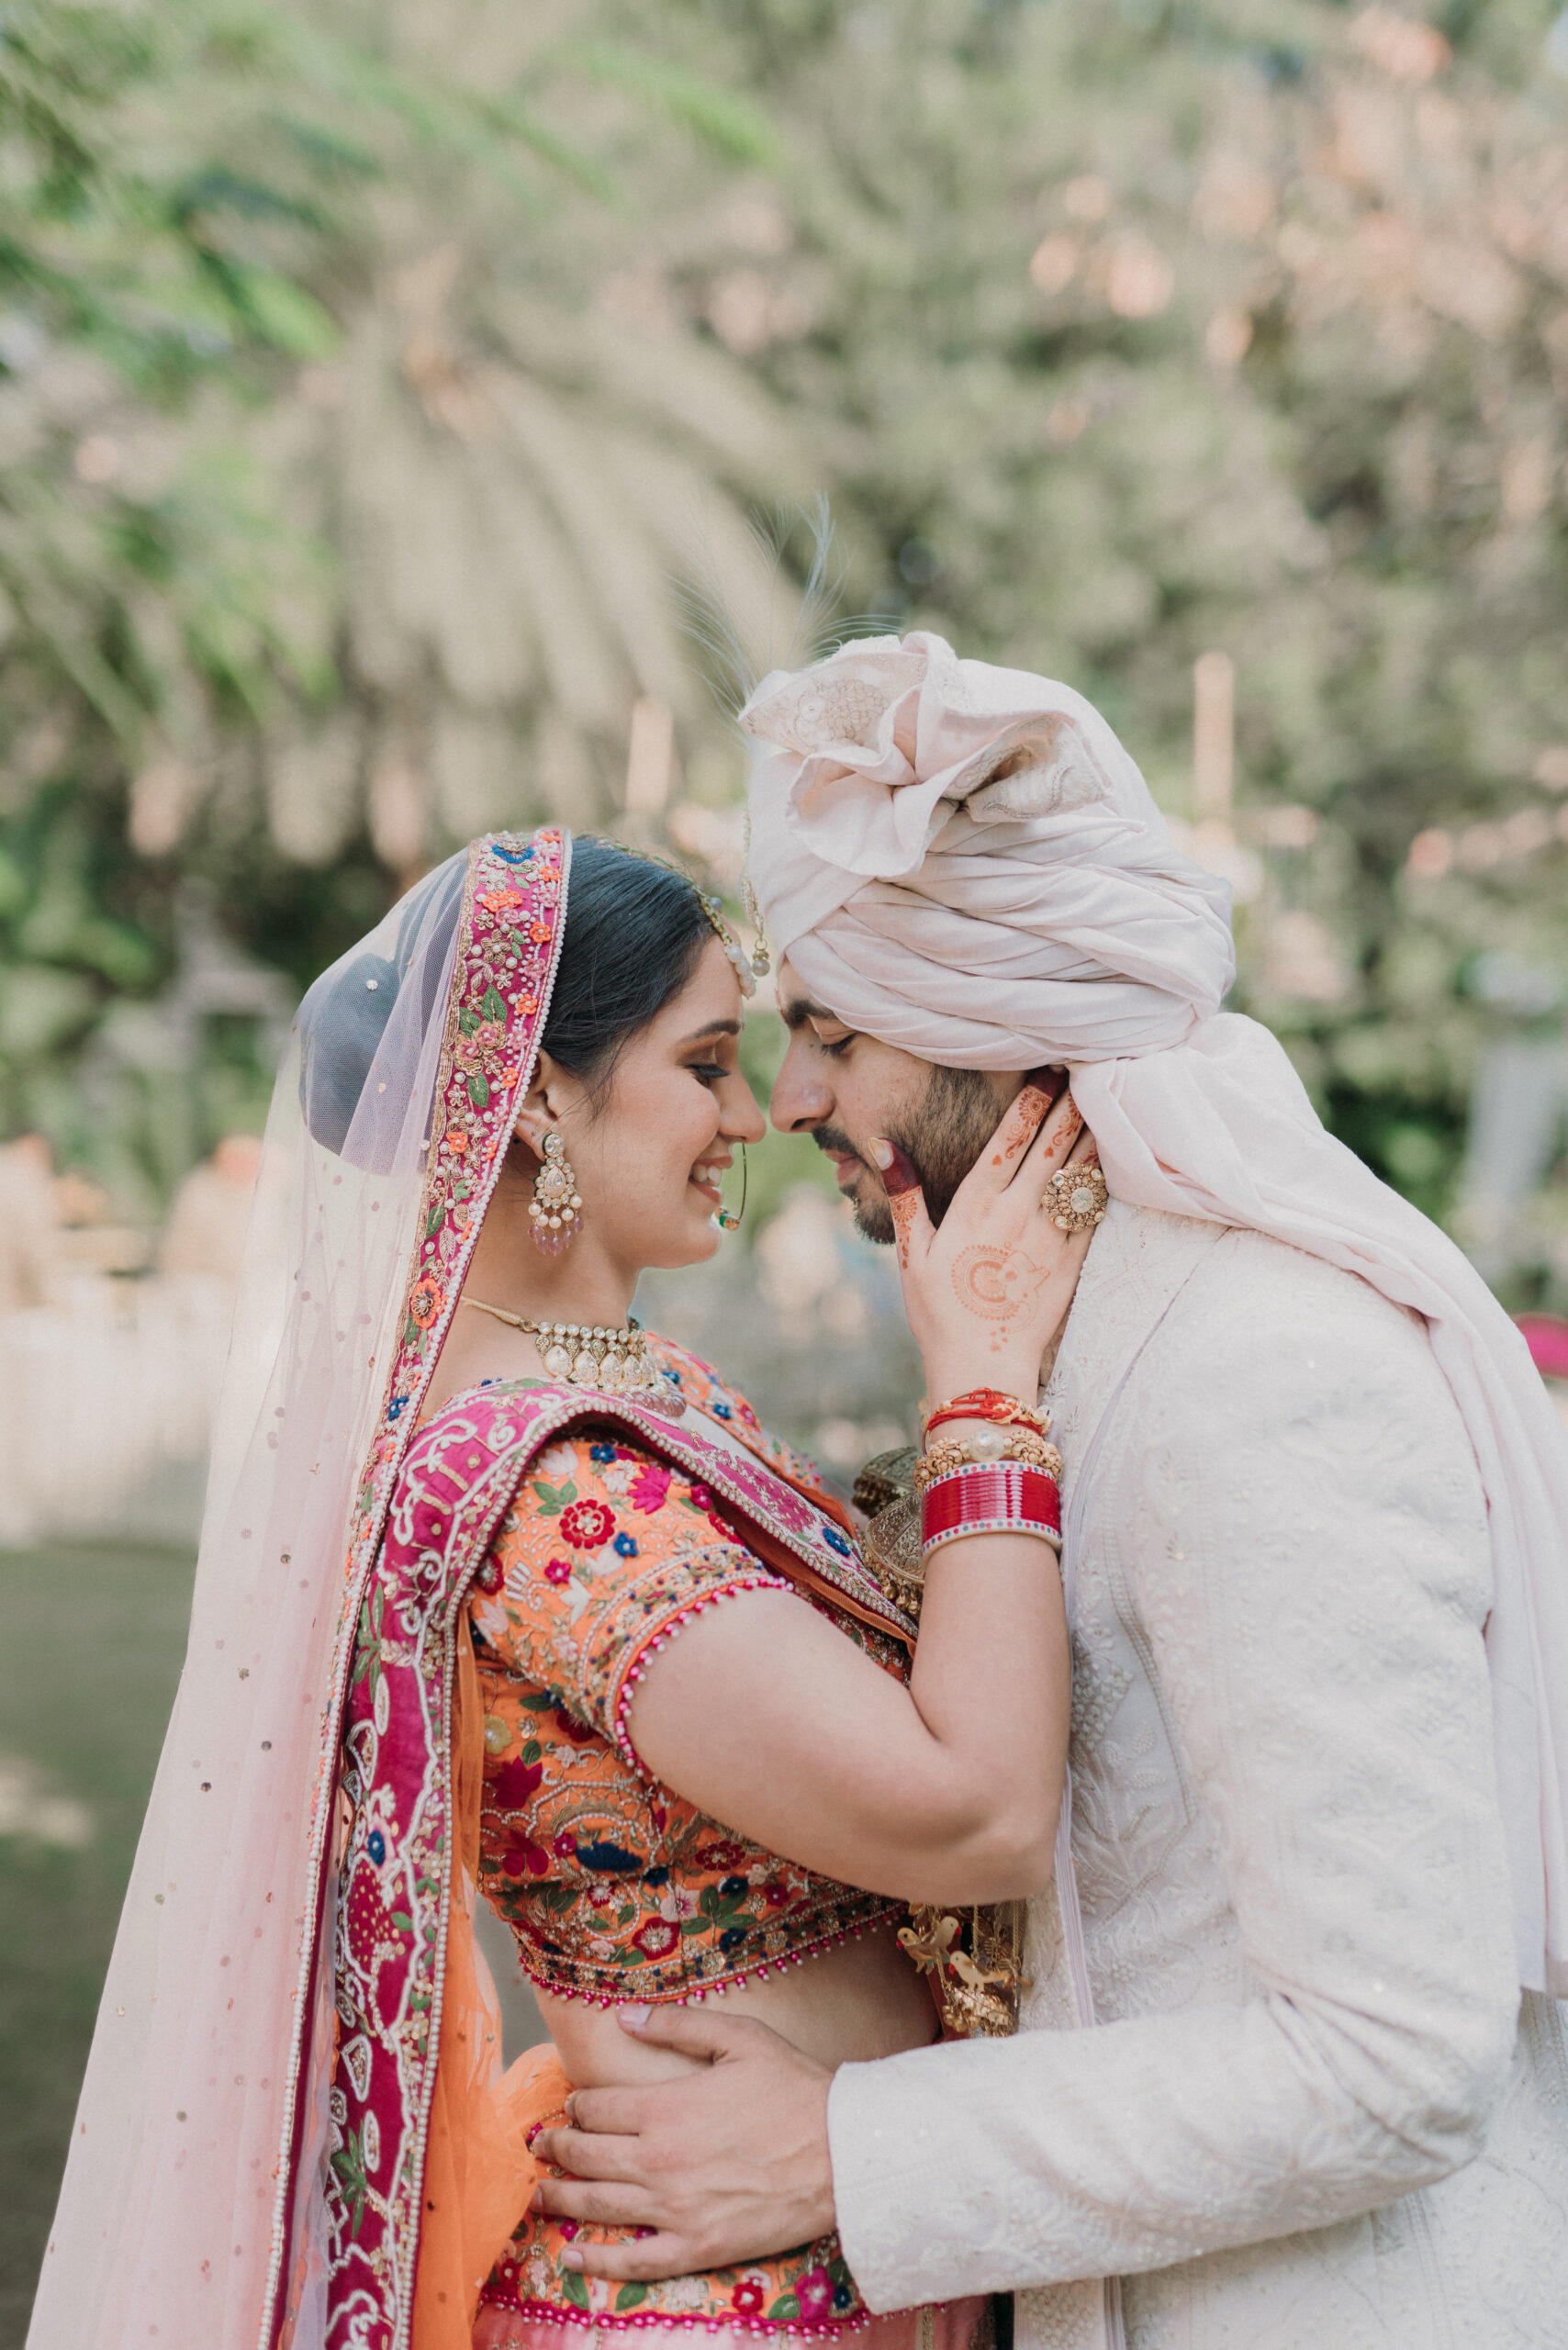 Pin by pavithra on photoshoot | Engagement photography poses, Photo poses  for couples, Indian wedding couple photography